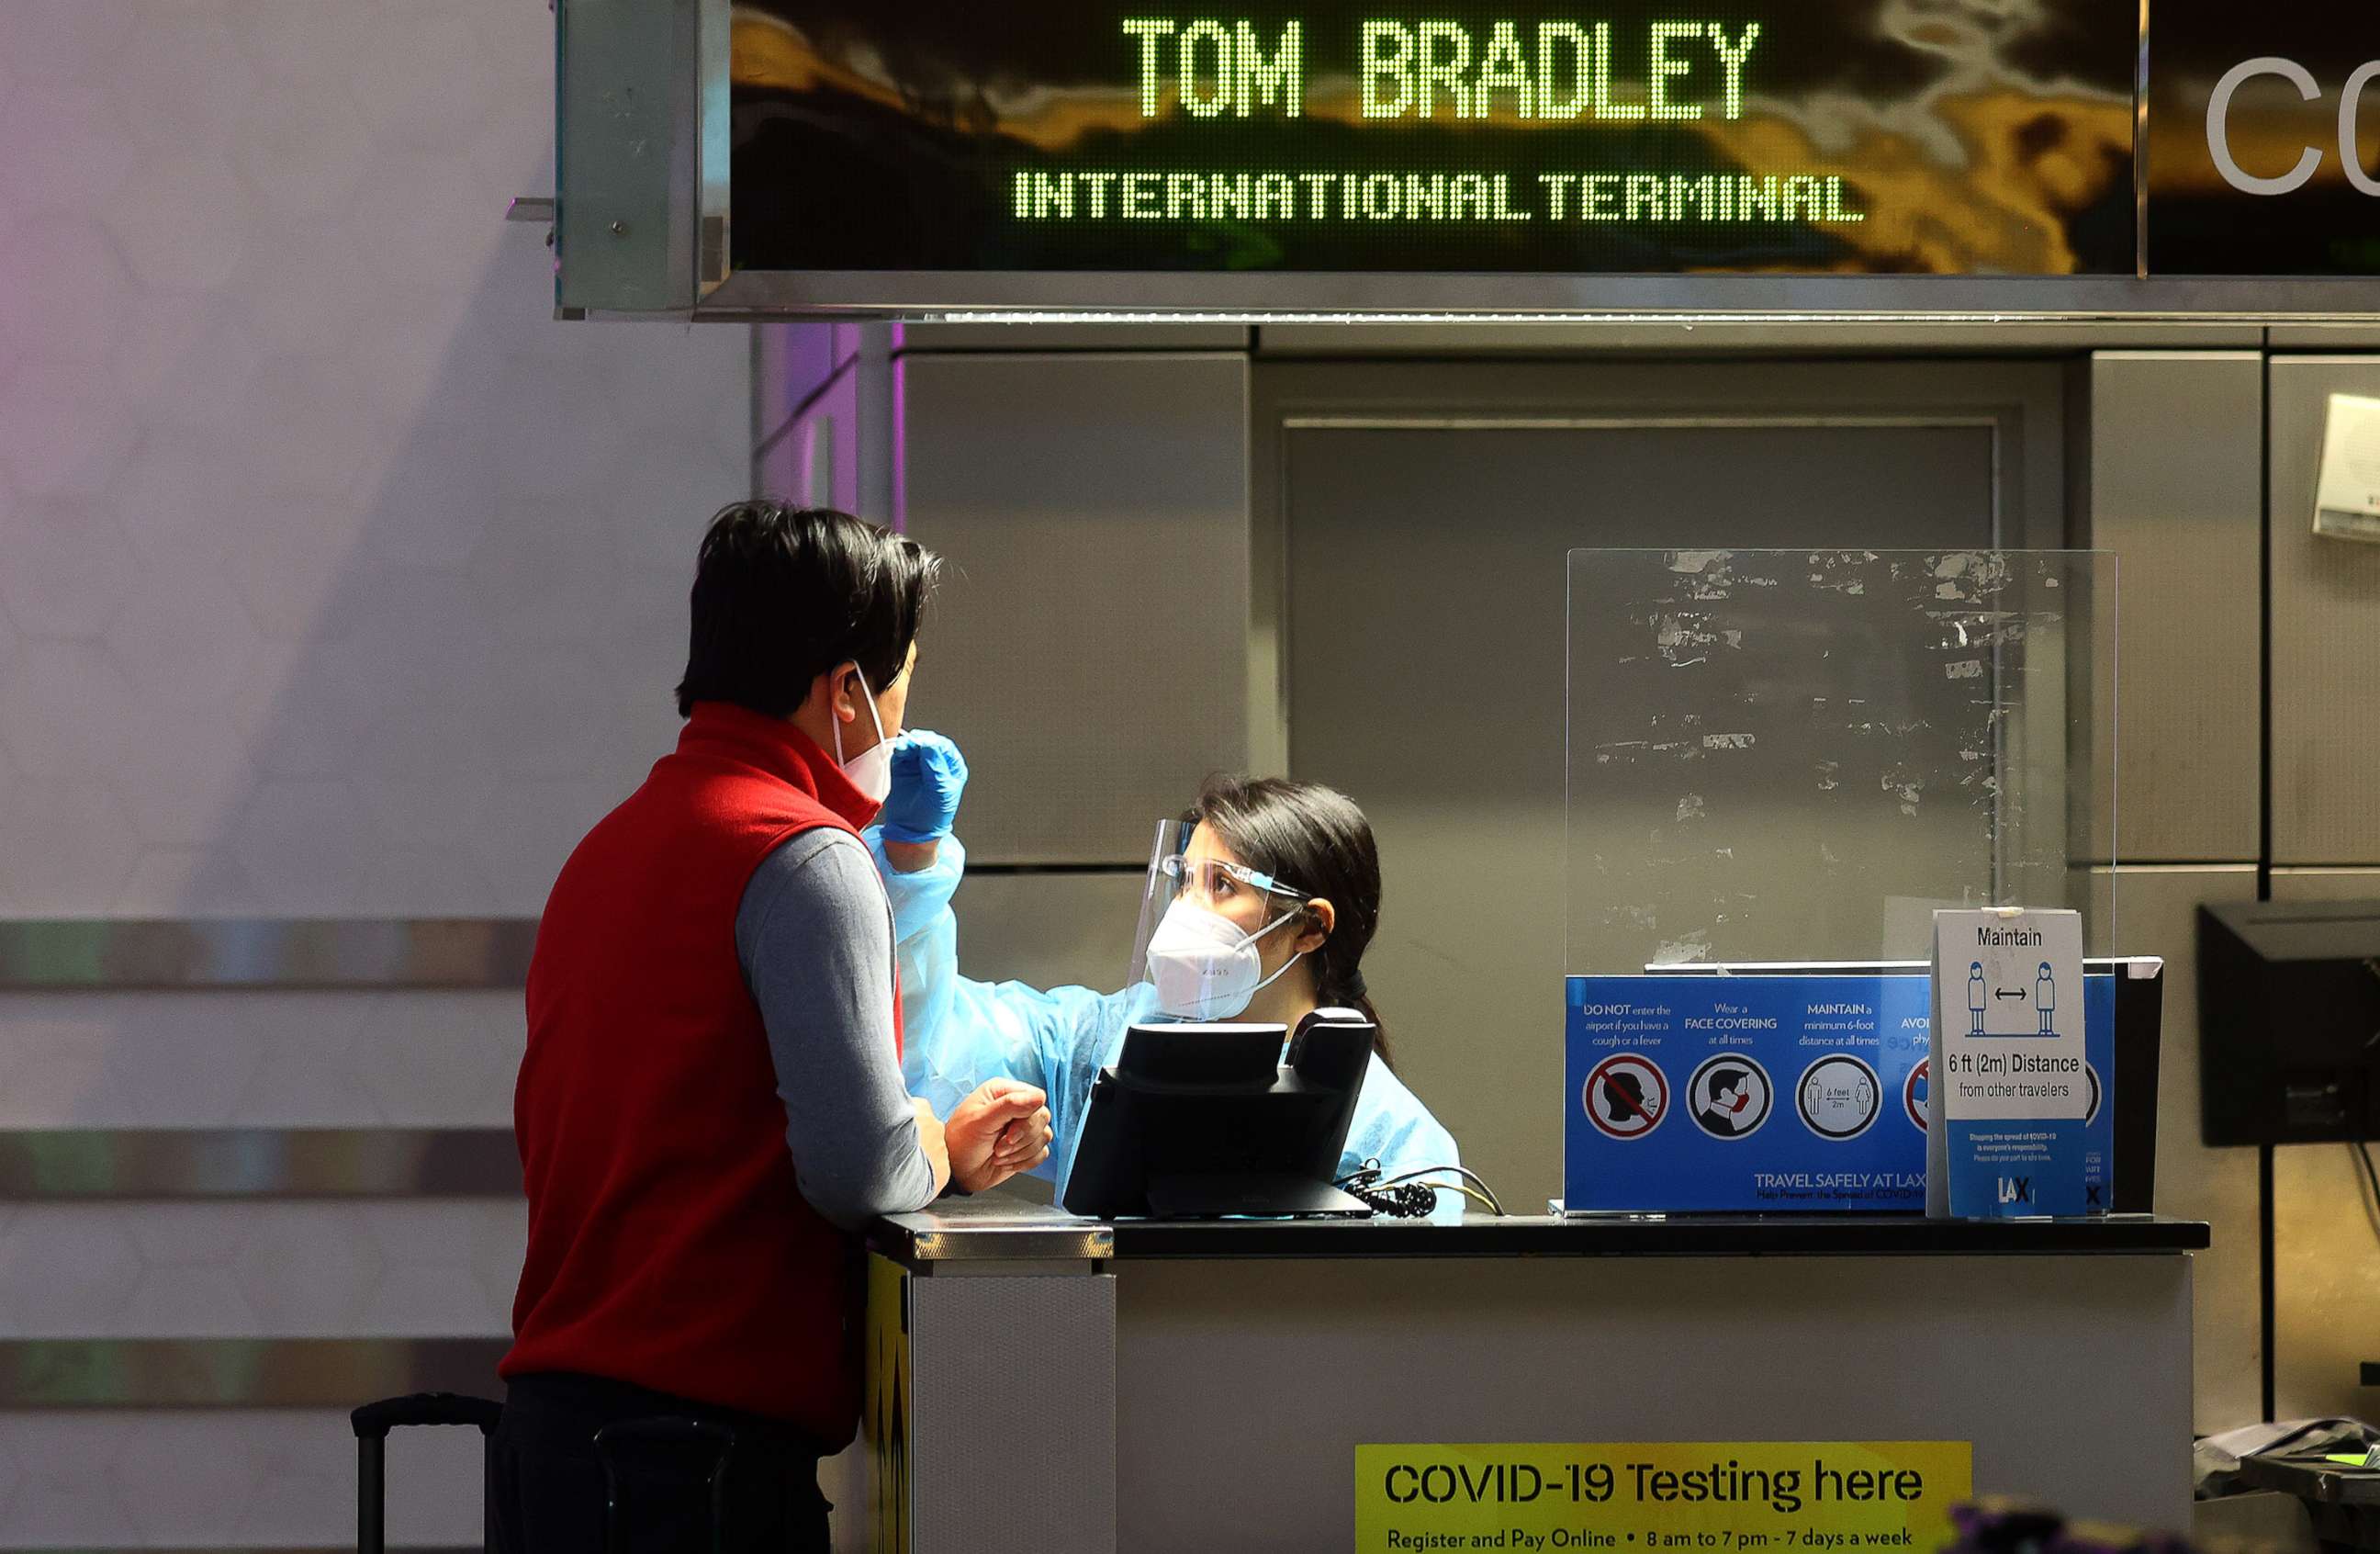 PHOTO: A COVID-19 test center operates at the Los Angeles International Airport, on Dec. 1, 2021 in Los Angeles.